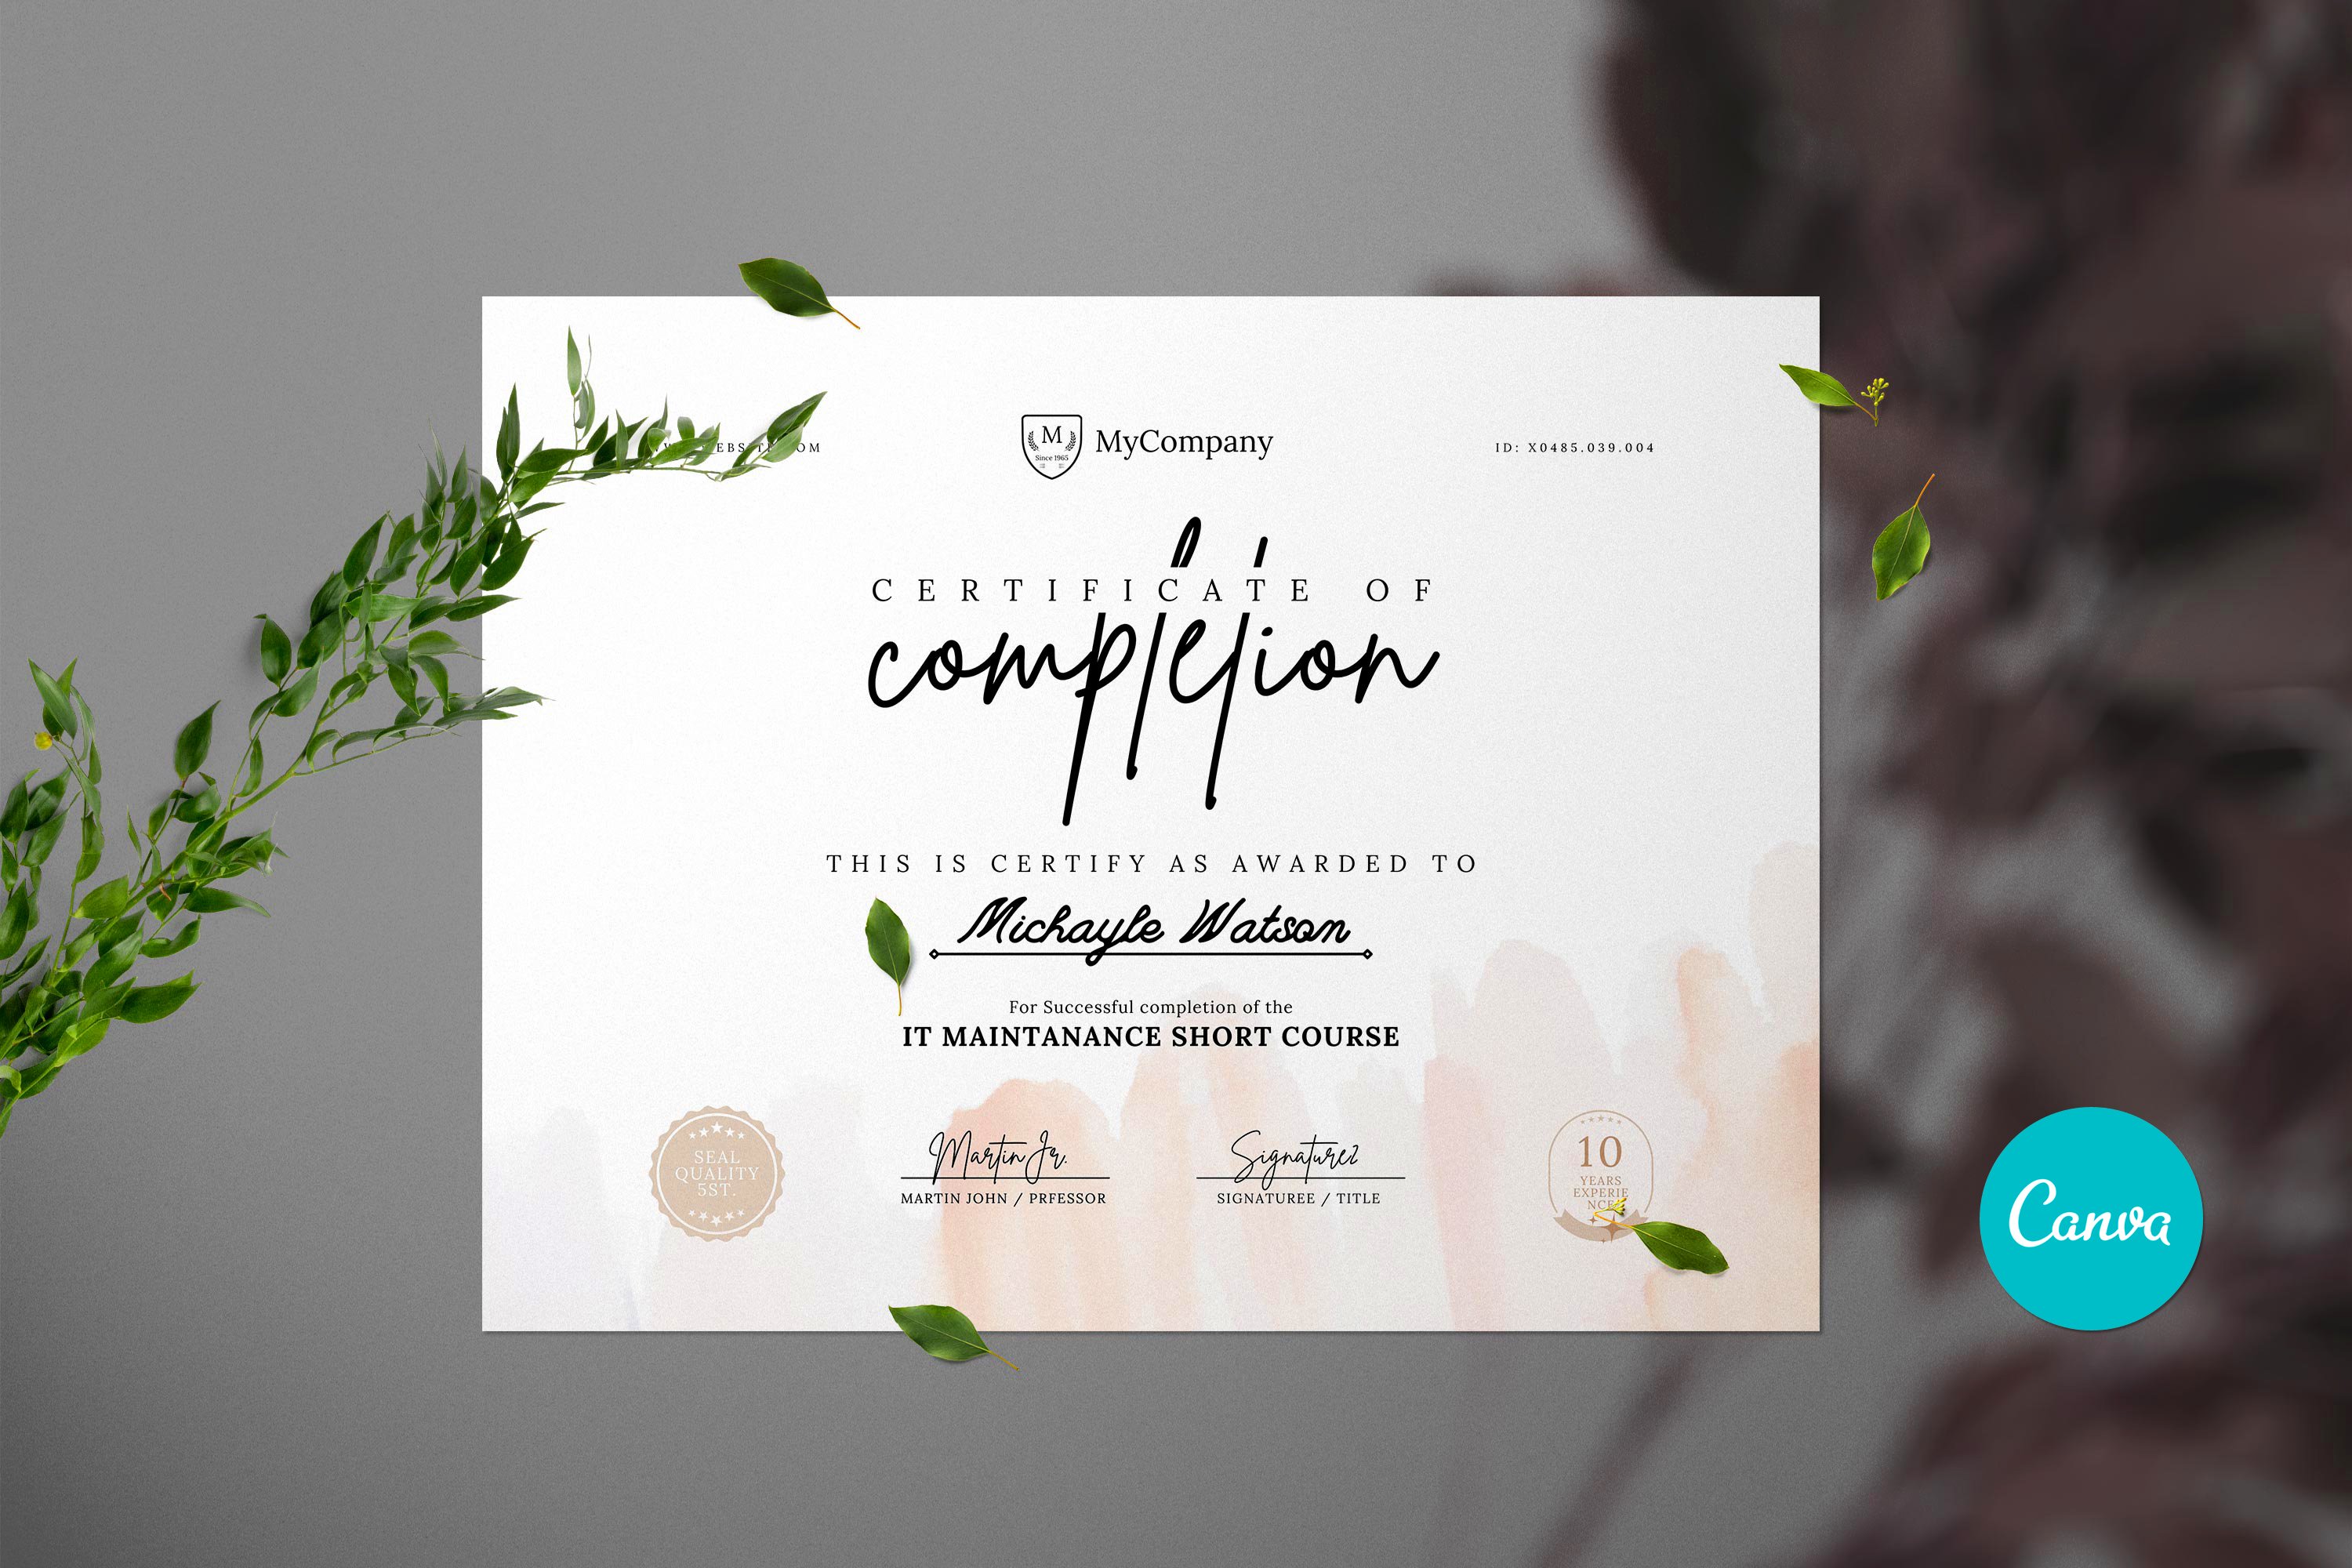 Certificate of Completion Canva cover image.